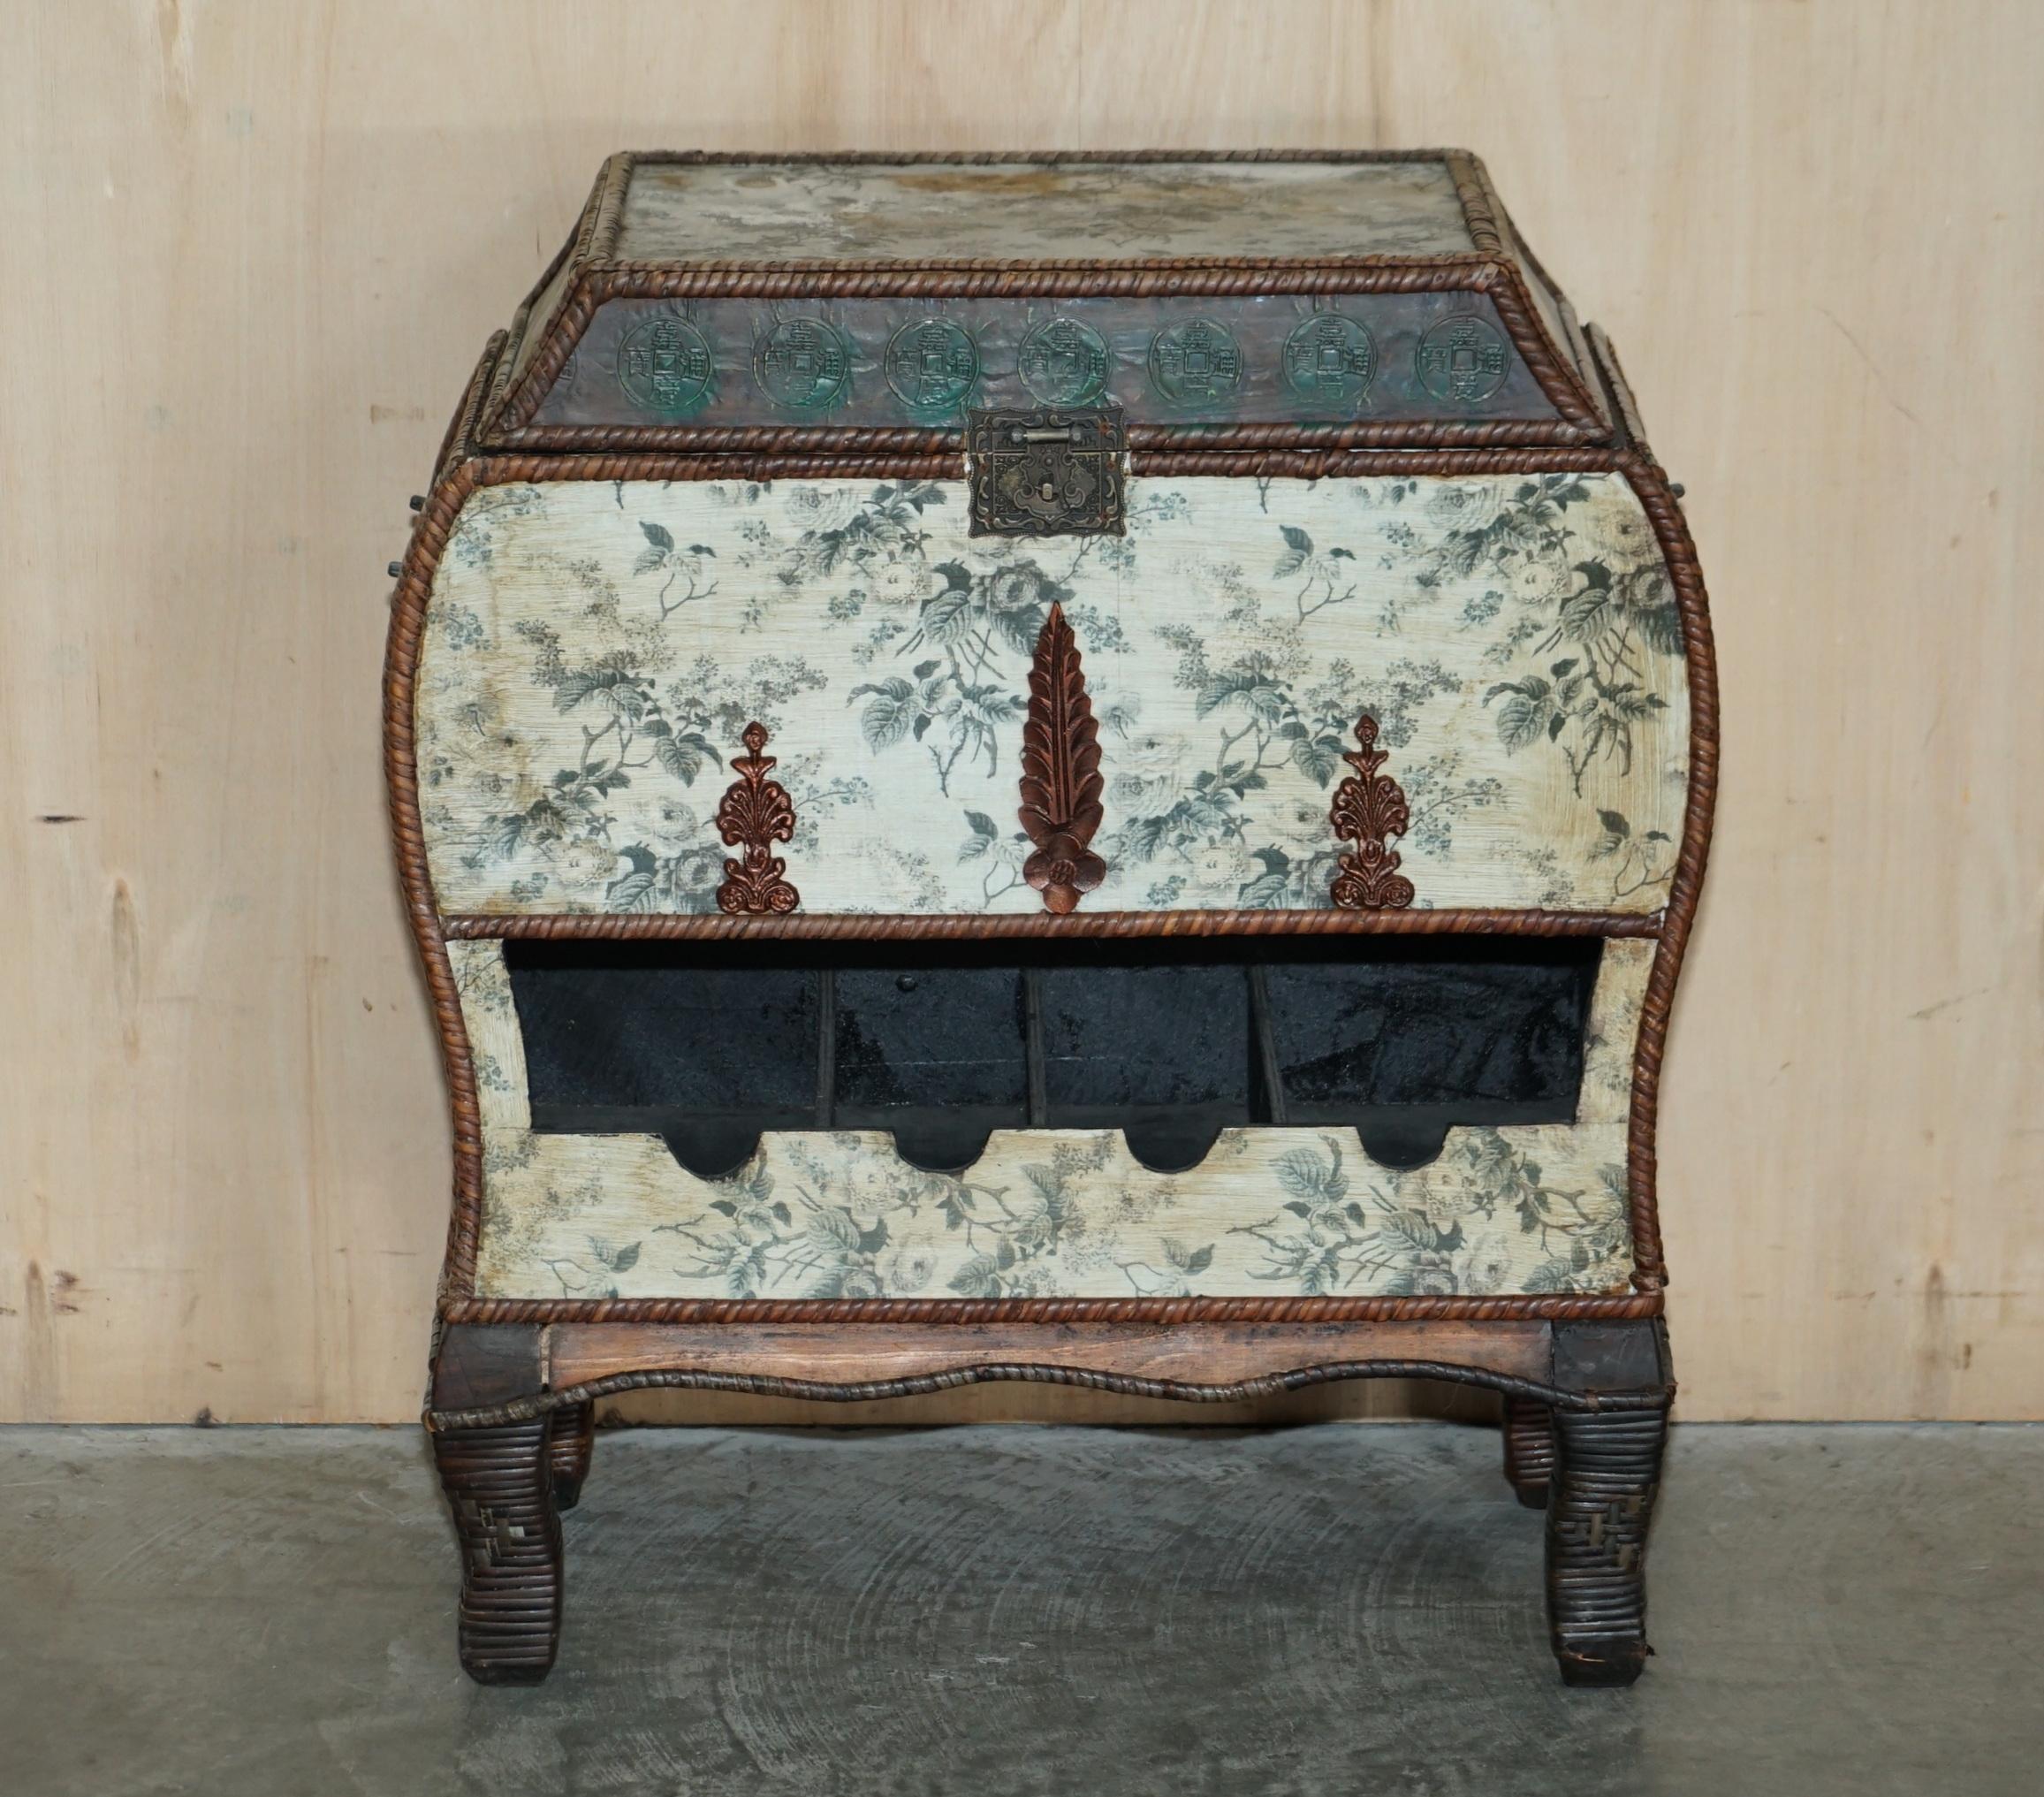 We are delighted to offer for sale this lovely decorative wine / drinks chest with top space for glasses.

A very nice and decorative piece, it seems to be hand painted and heavily finished in the Chinese style. Size wise its like a large side